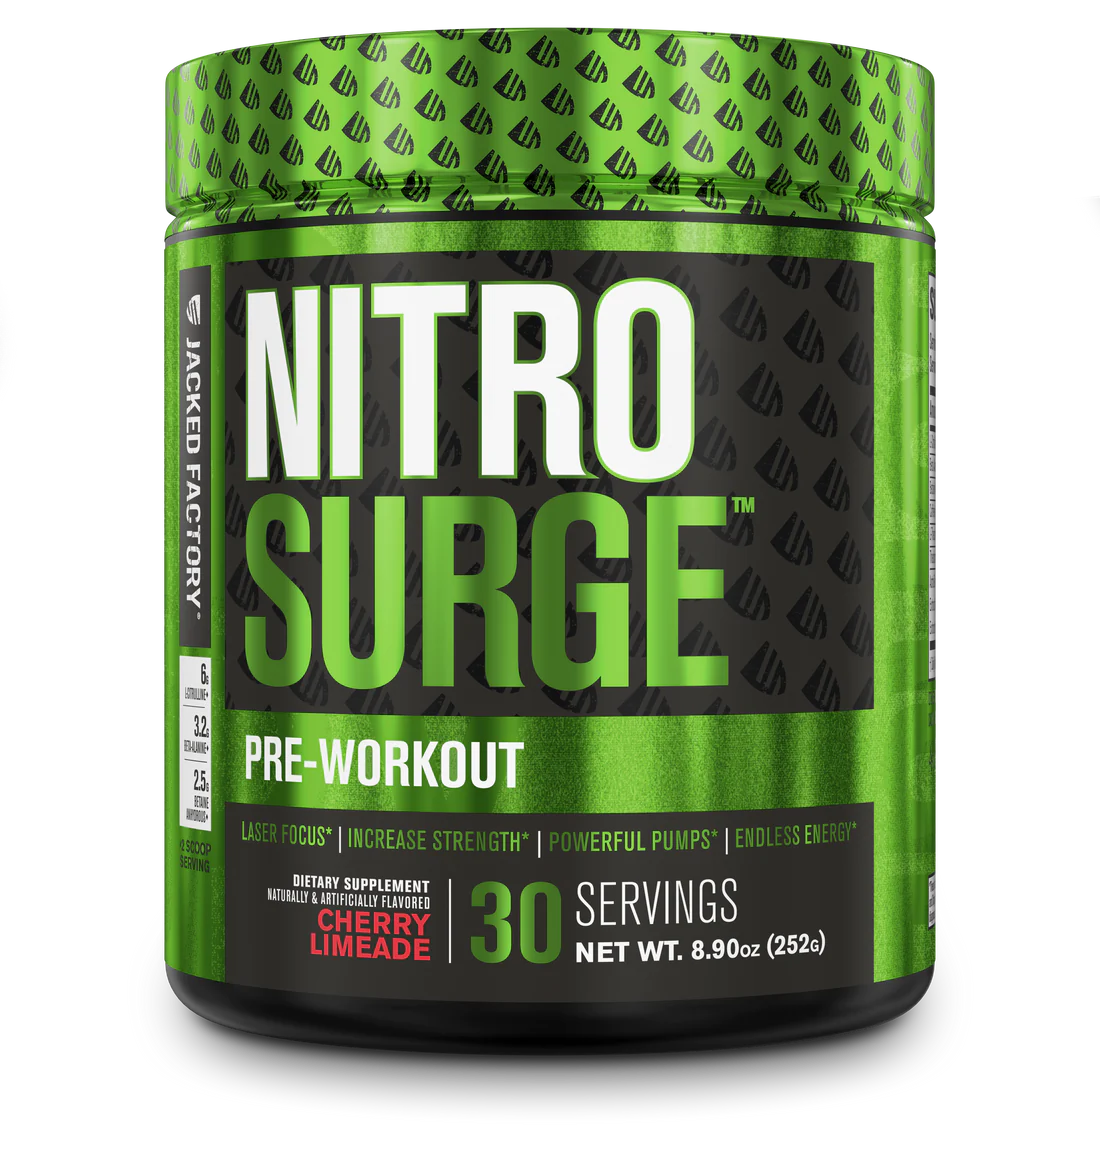 Nitro Pre Workout is the cheapest best tasting pre workout